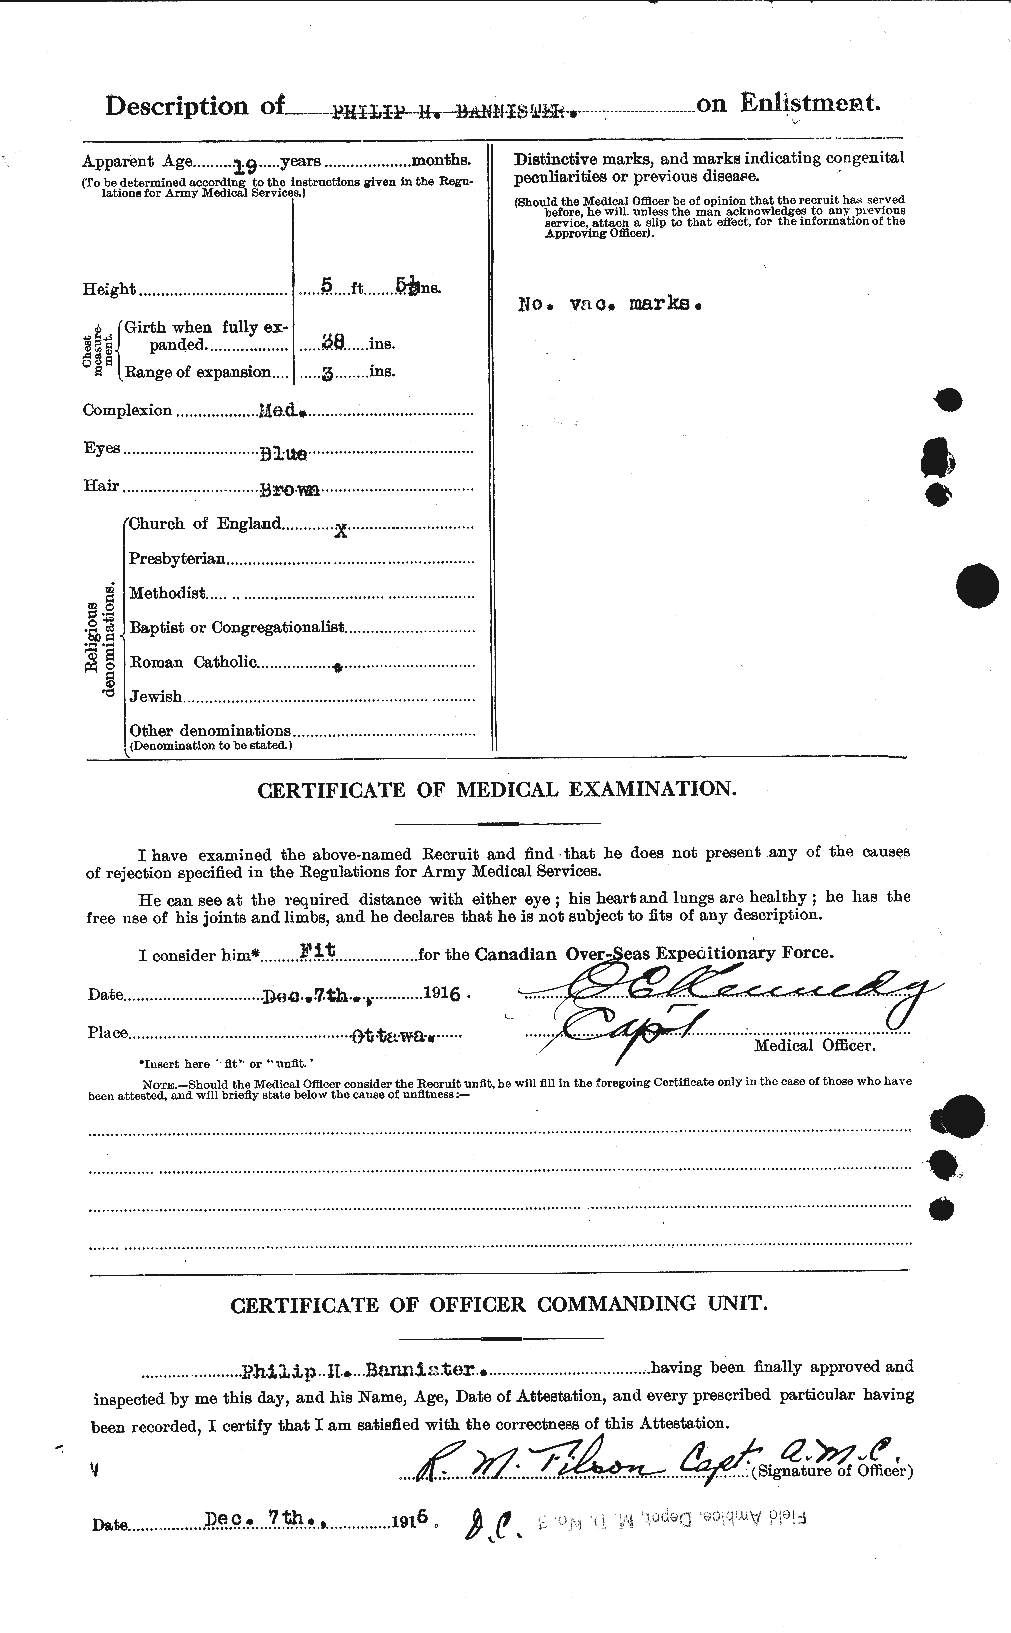 Personnel Records of the First World War - CEF 224772b